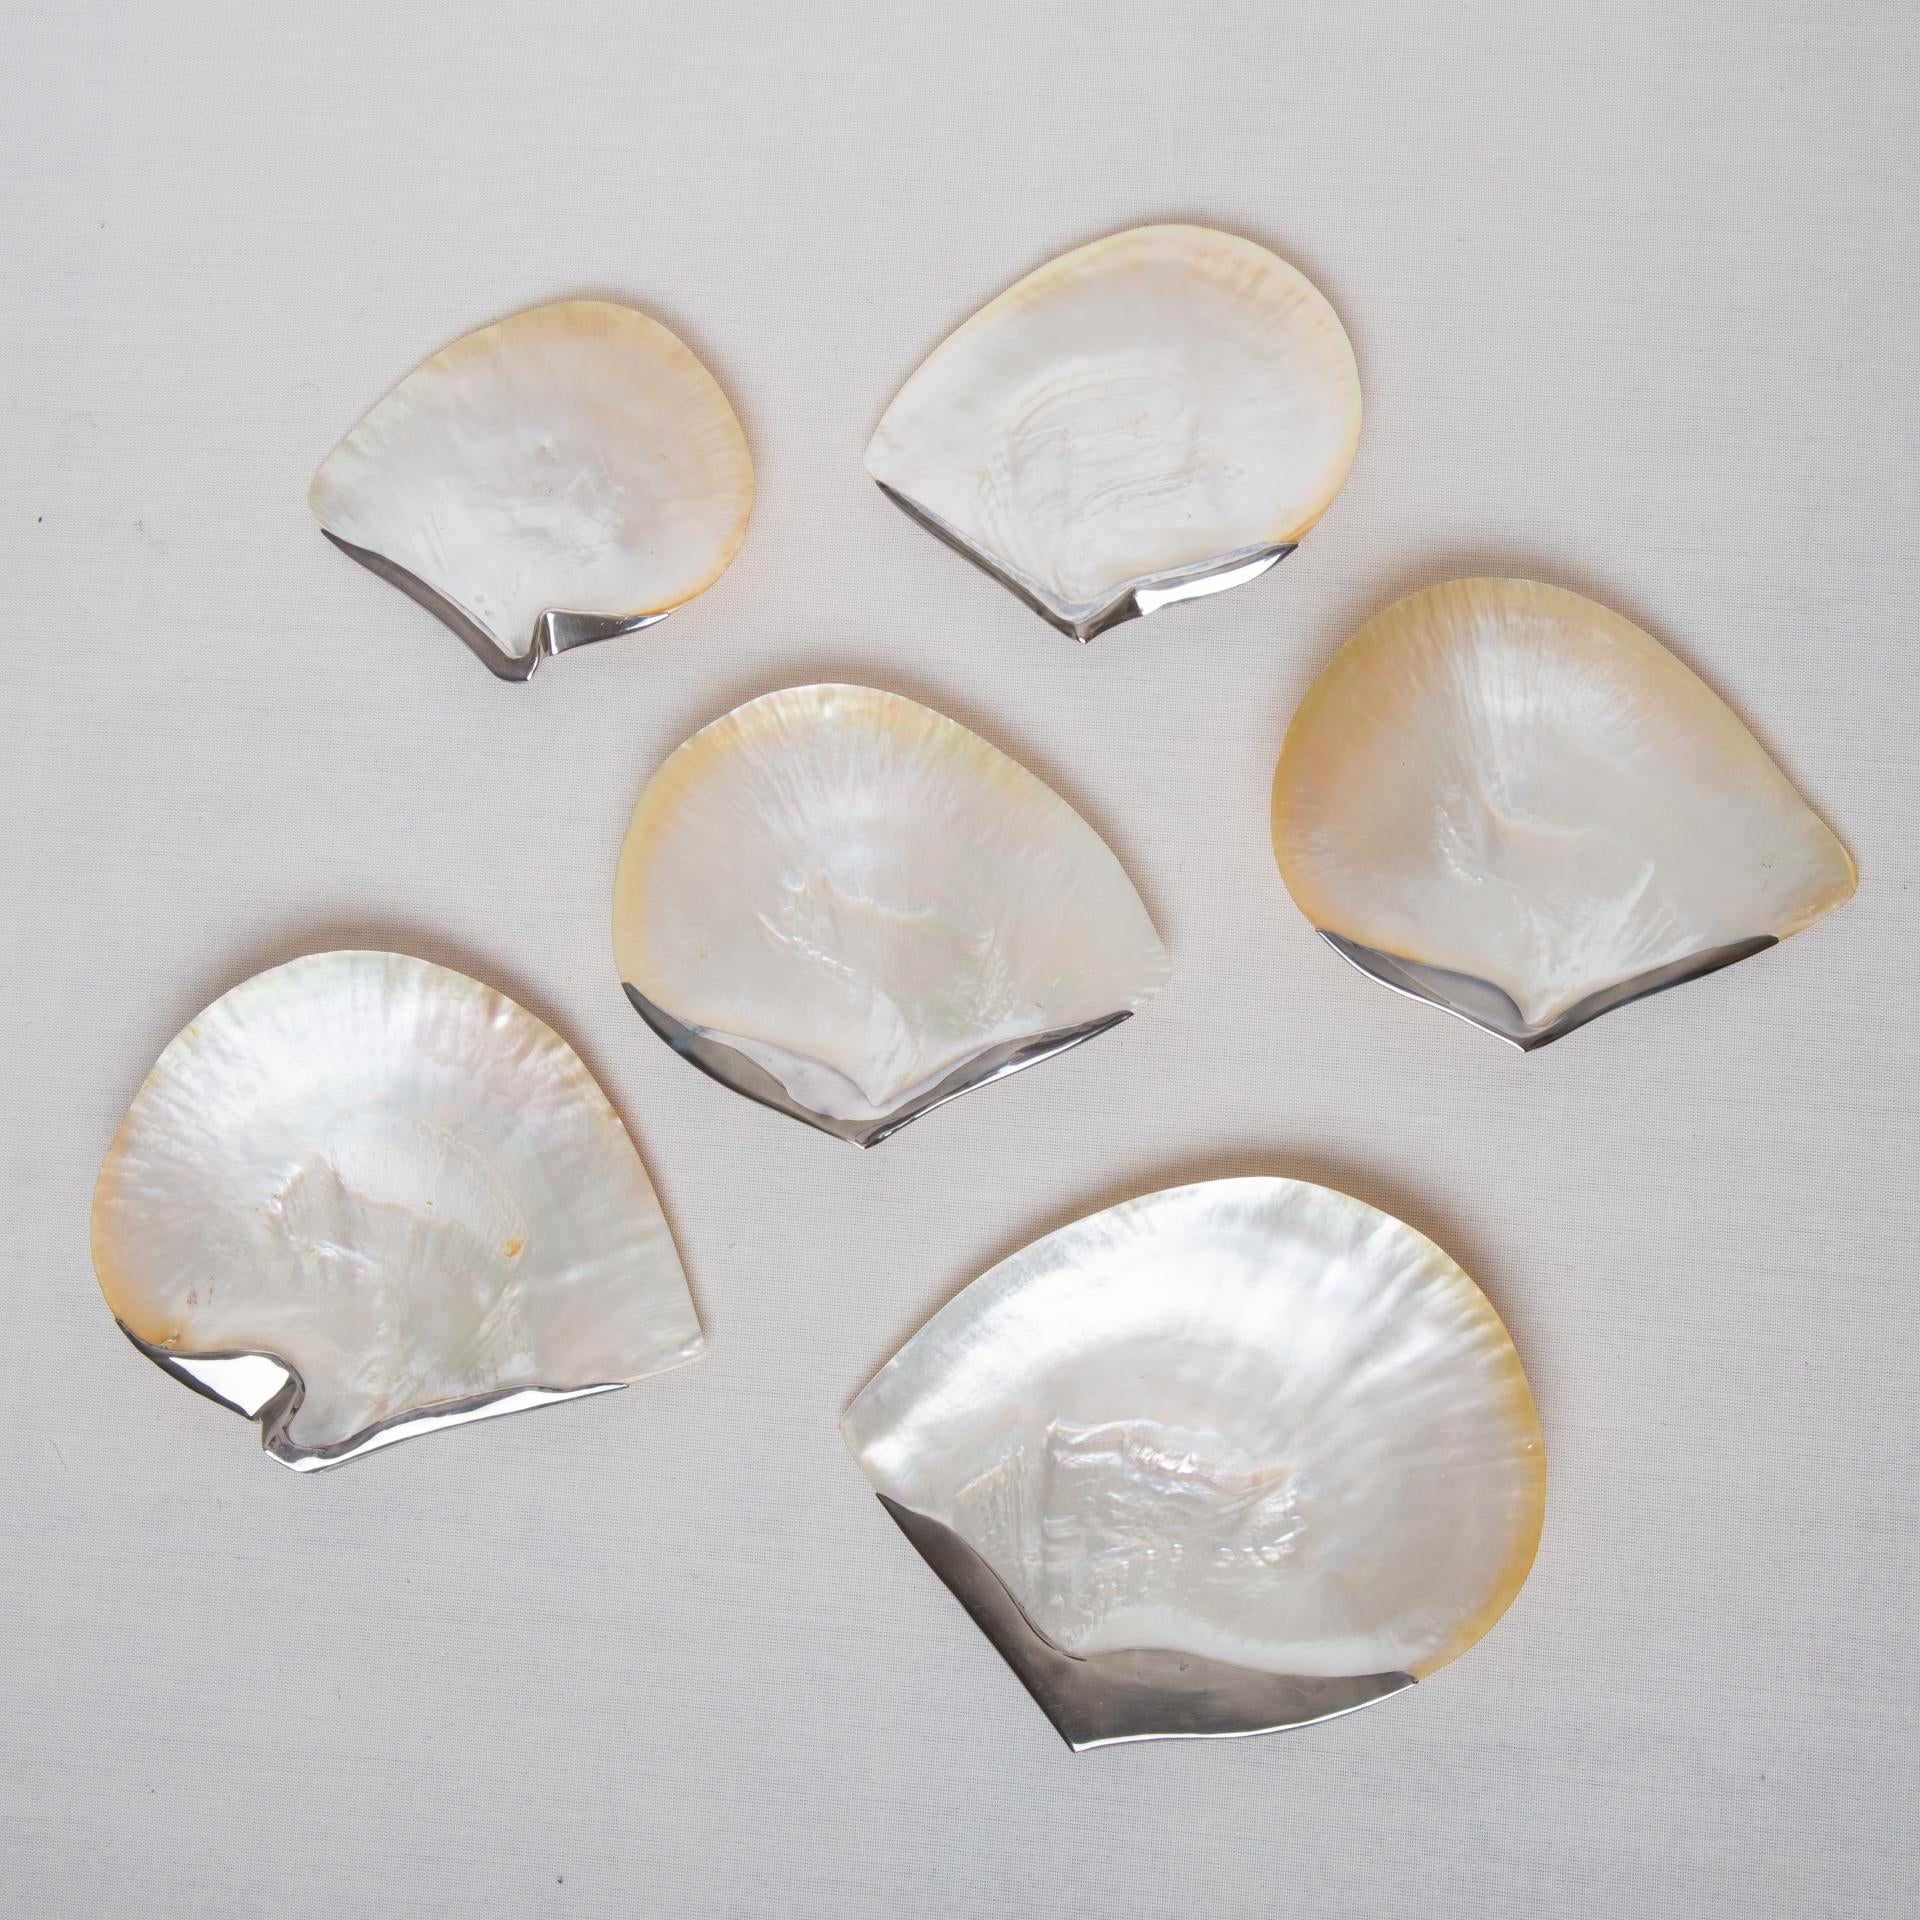 Other Plates Made of Polished Mother of Pearl and Silver